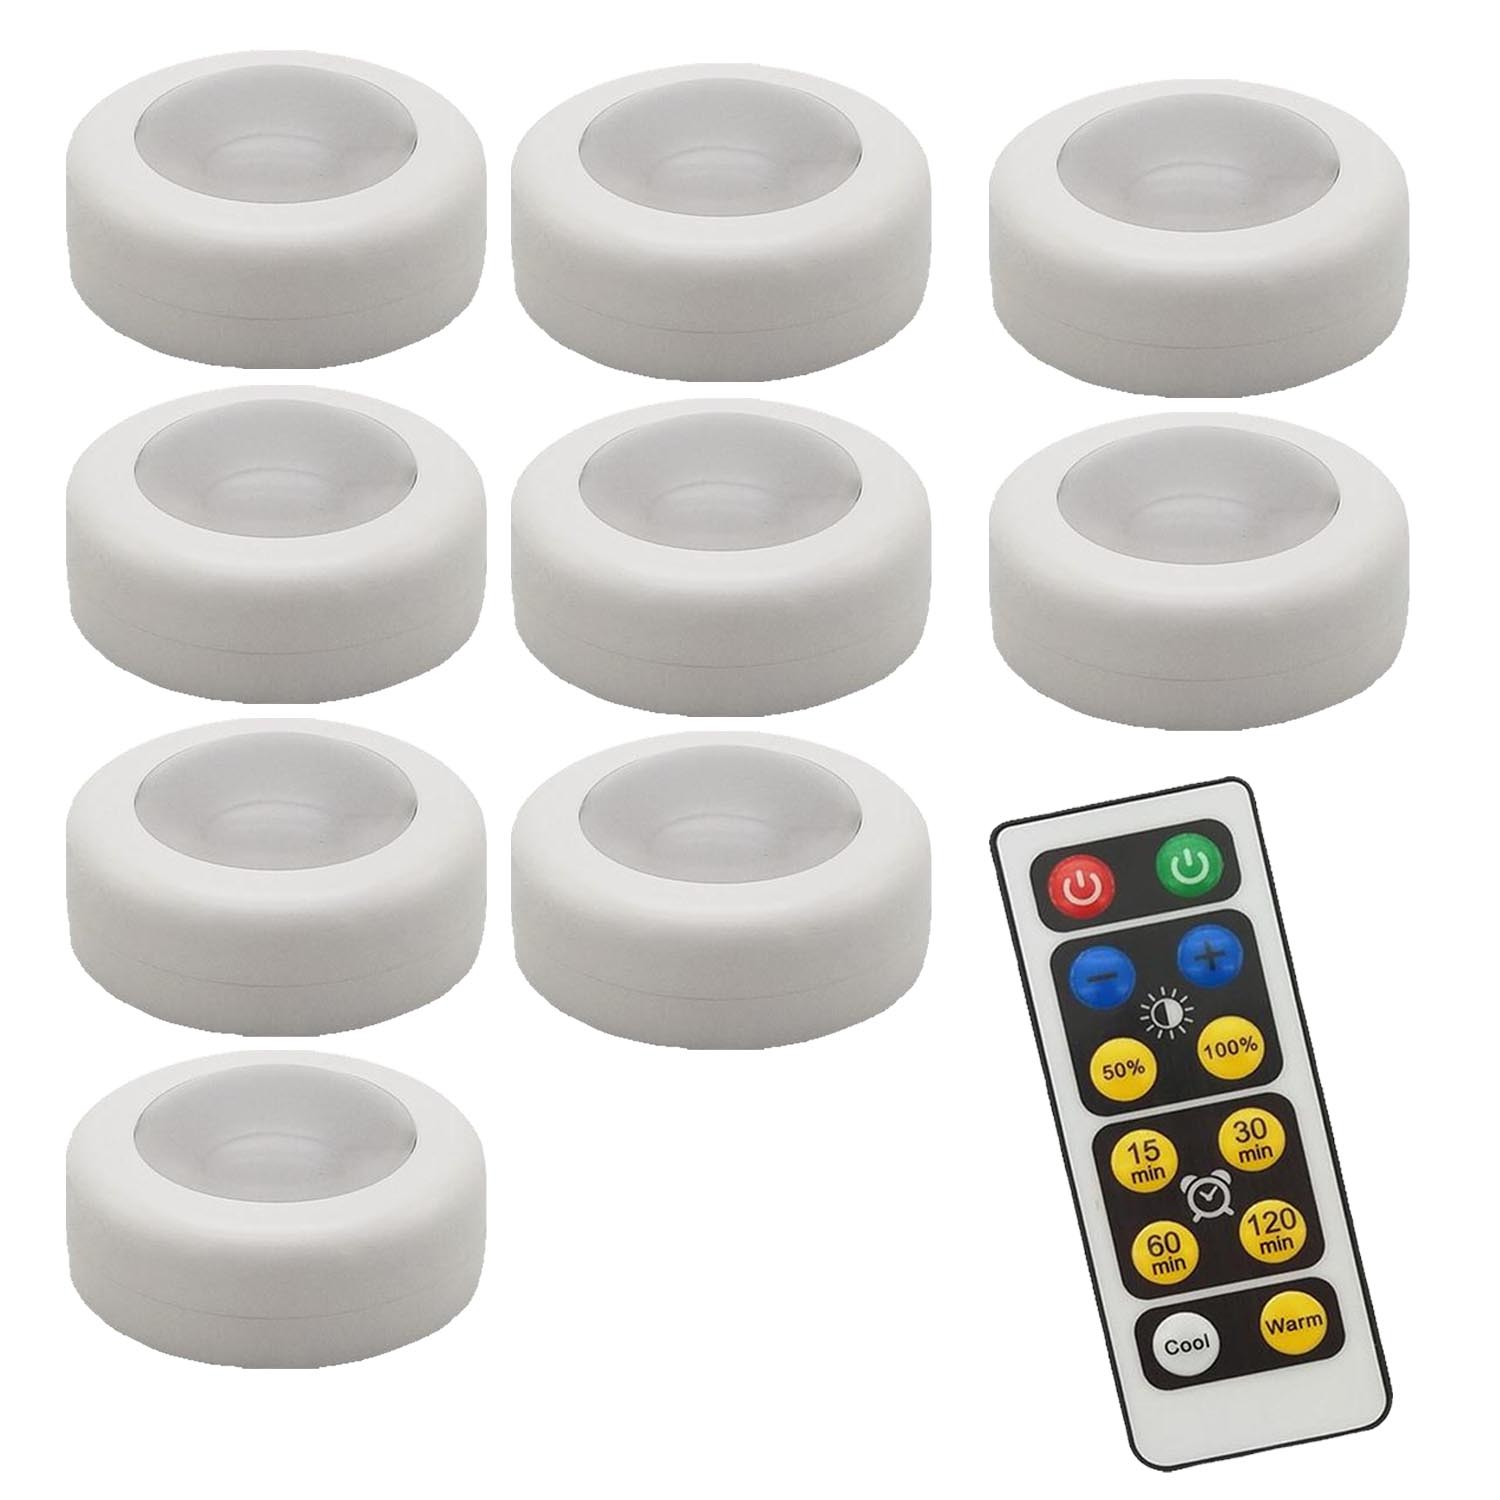 Wireless LED Dimmable Night Cabinet Wall Light Warm Cool White Remote Control 